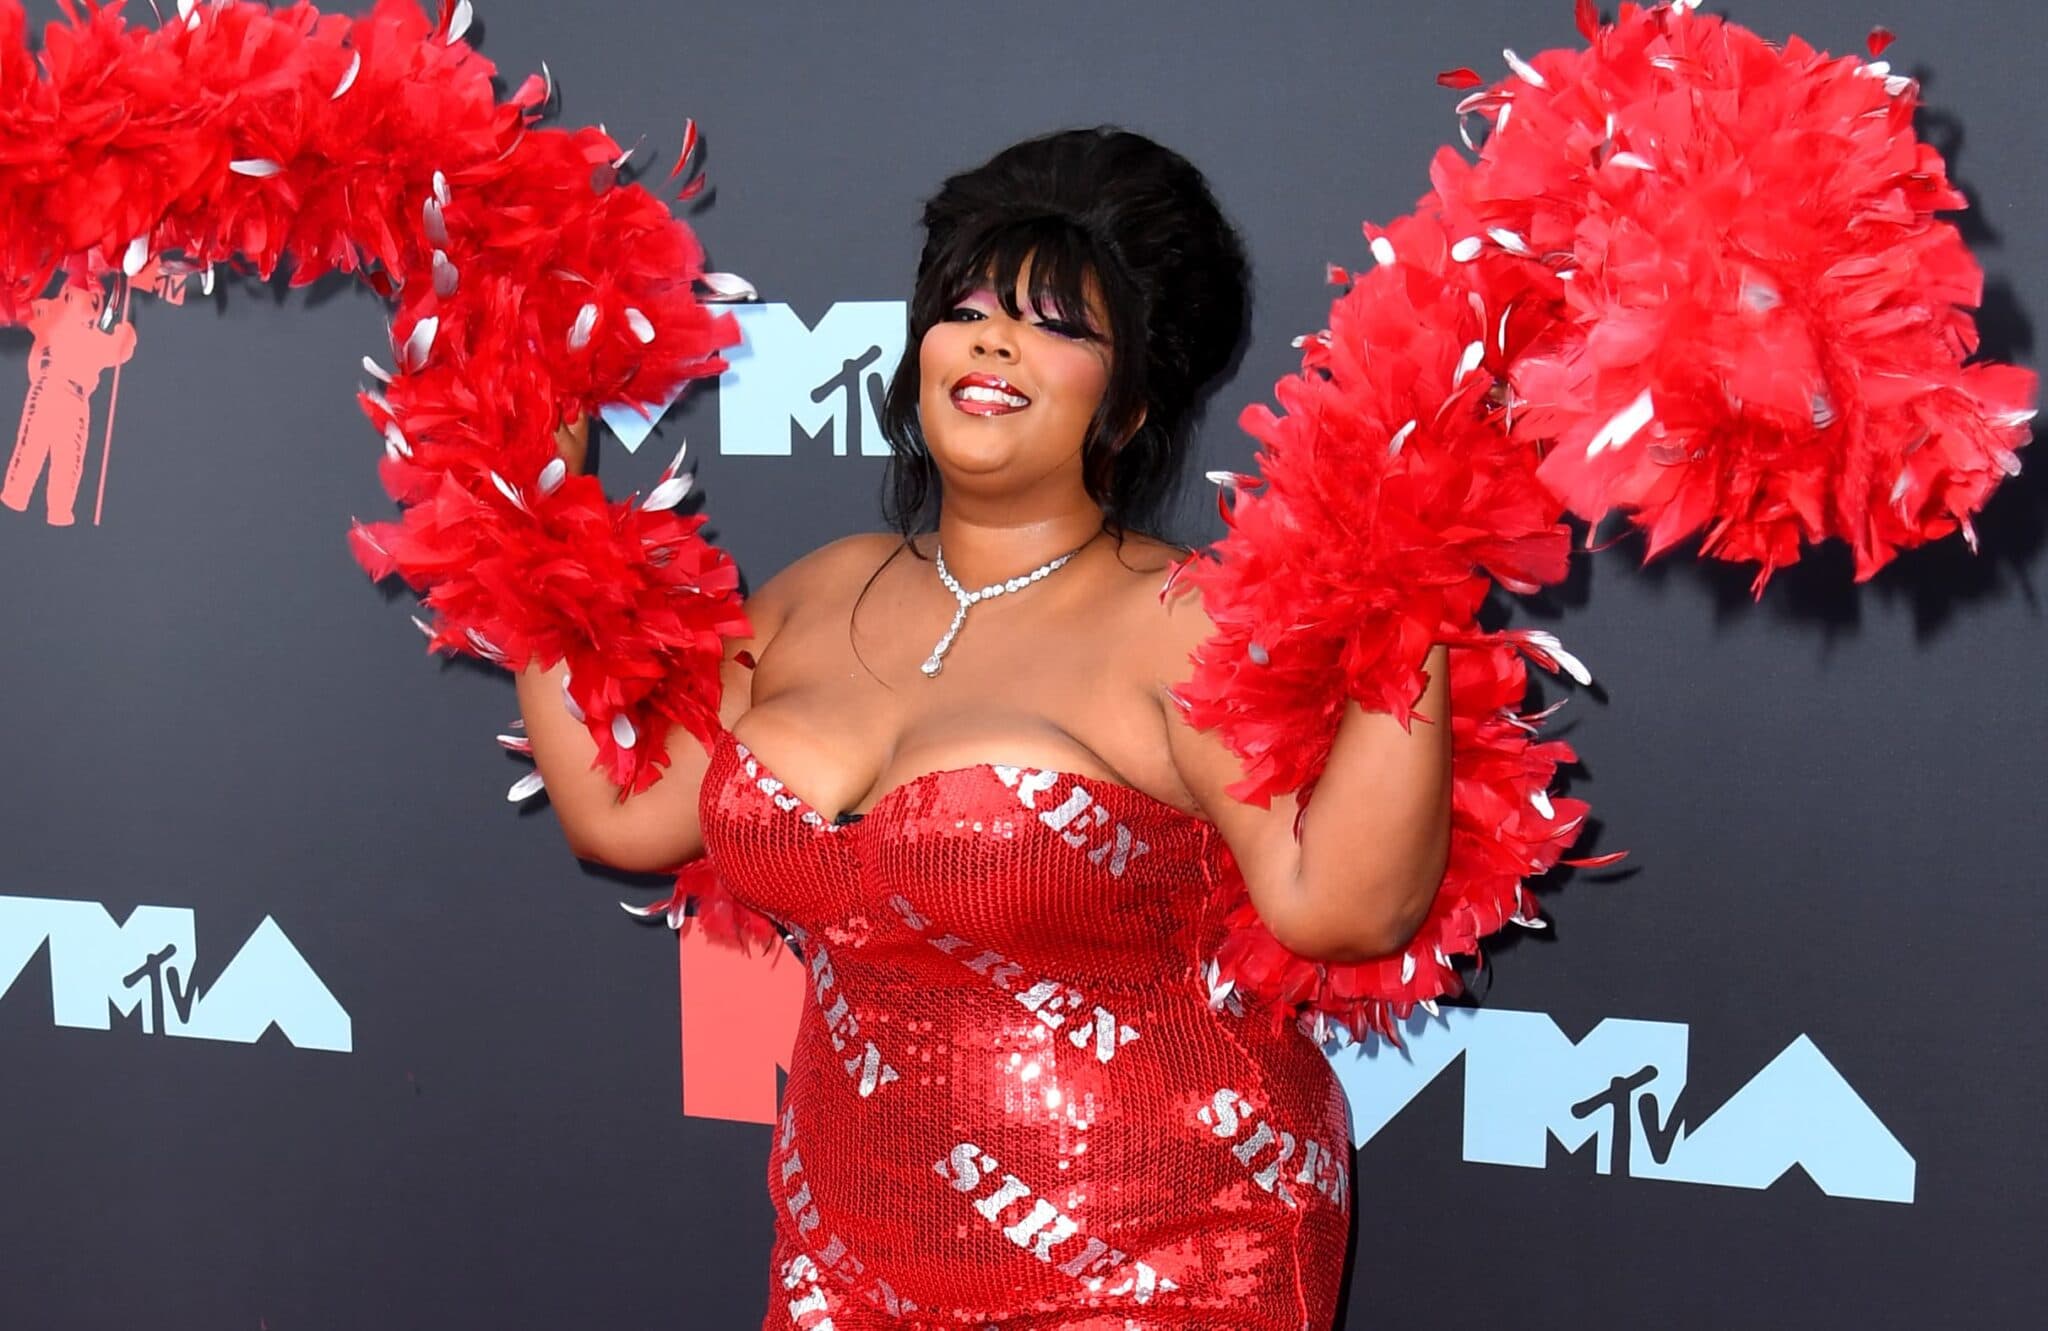 Why we all need to take a leaf out of lizzo’s book